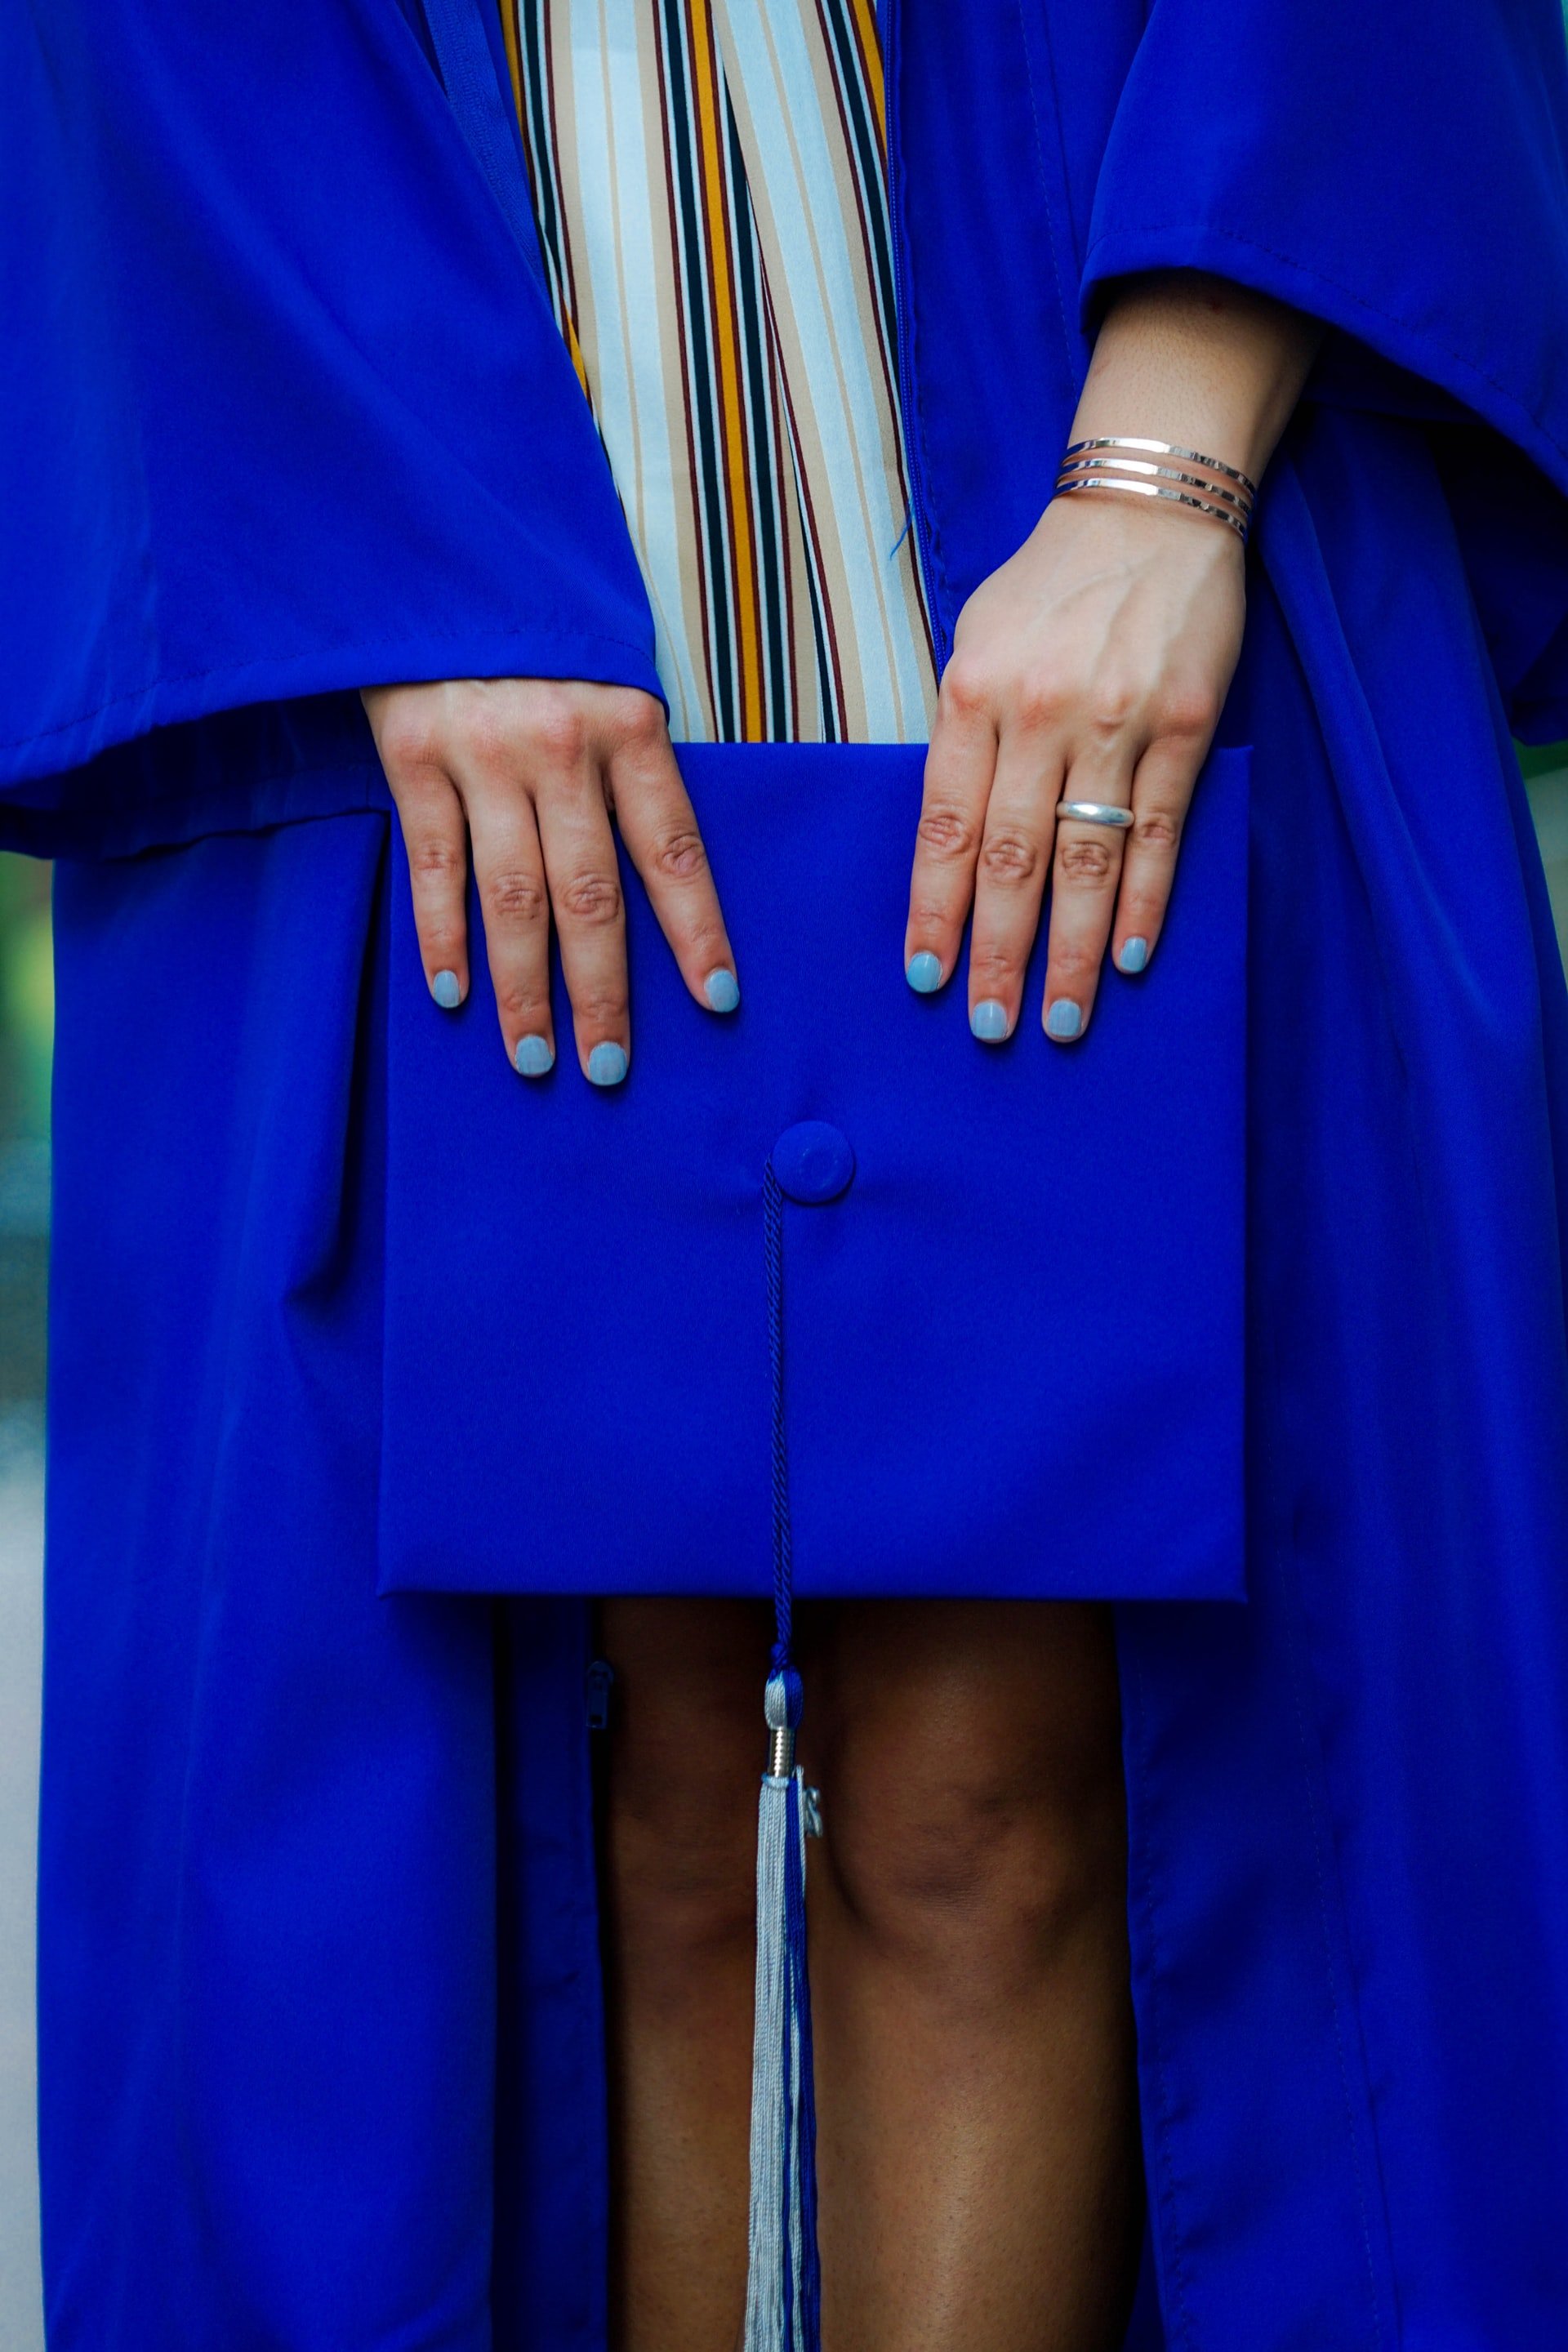 Samantha was proud to be wearing her cap and gown, as everyone gathered for the graduation ceremony. | Source: Pexels